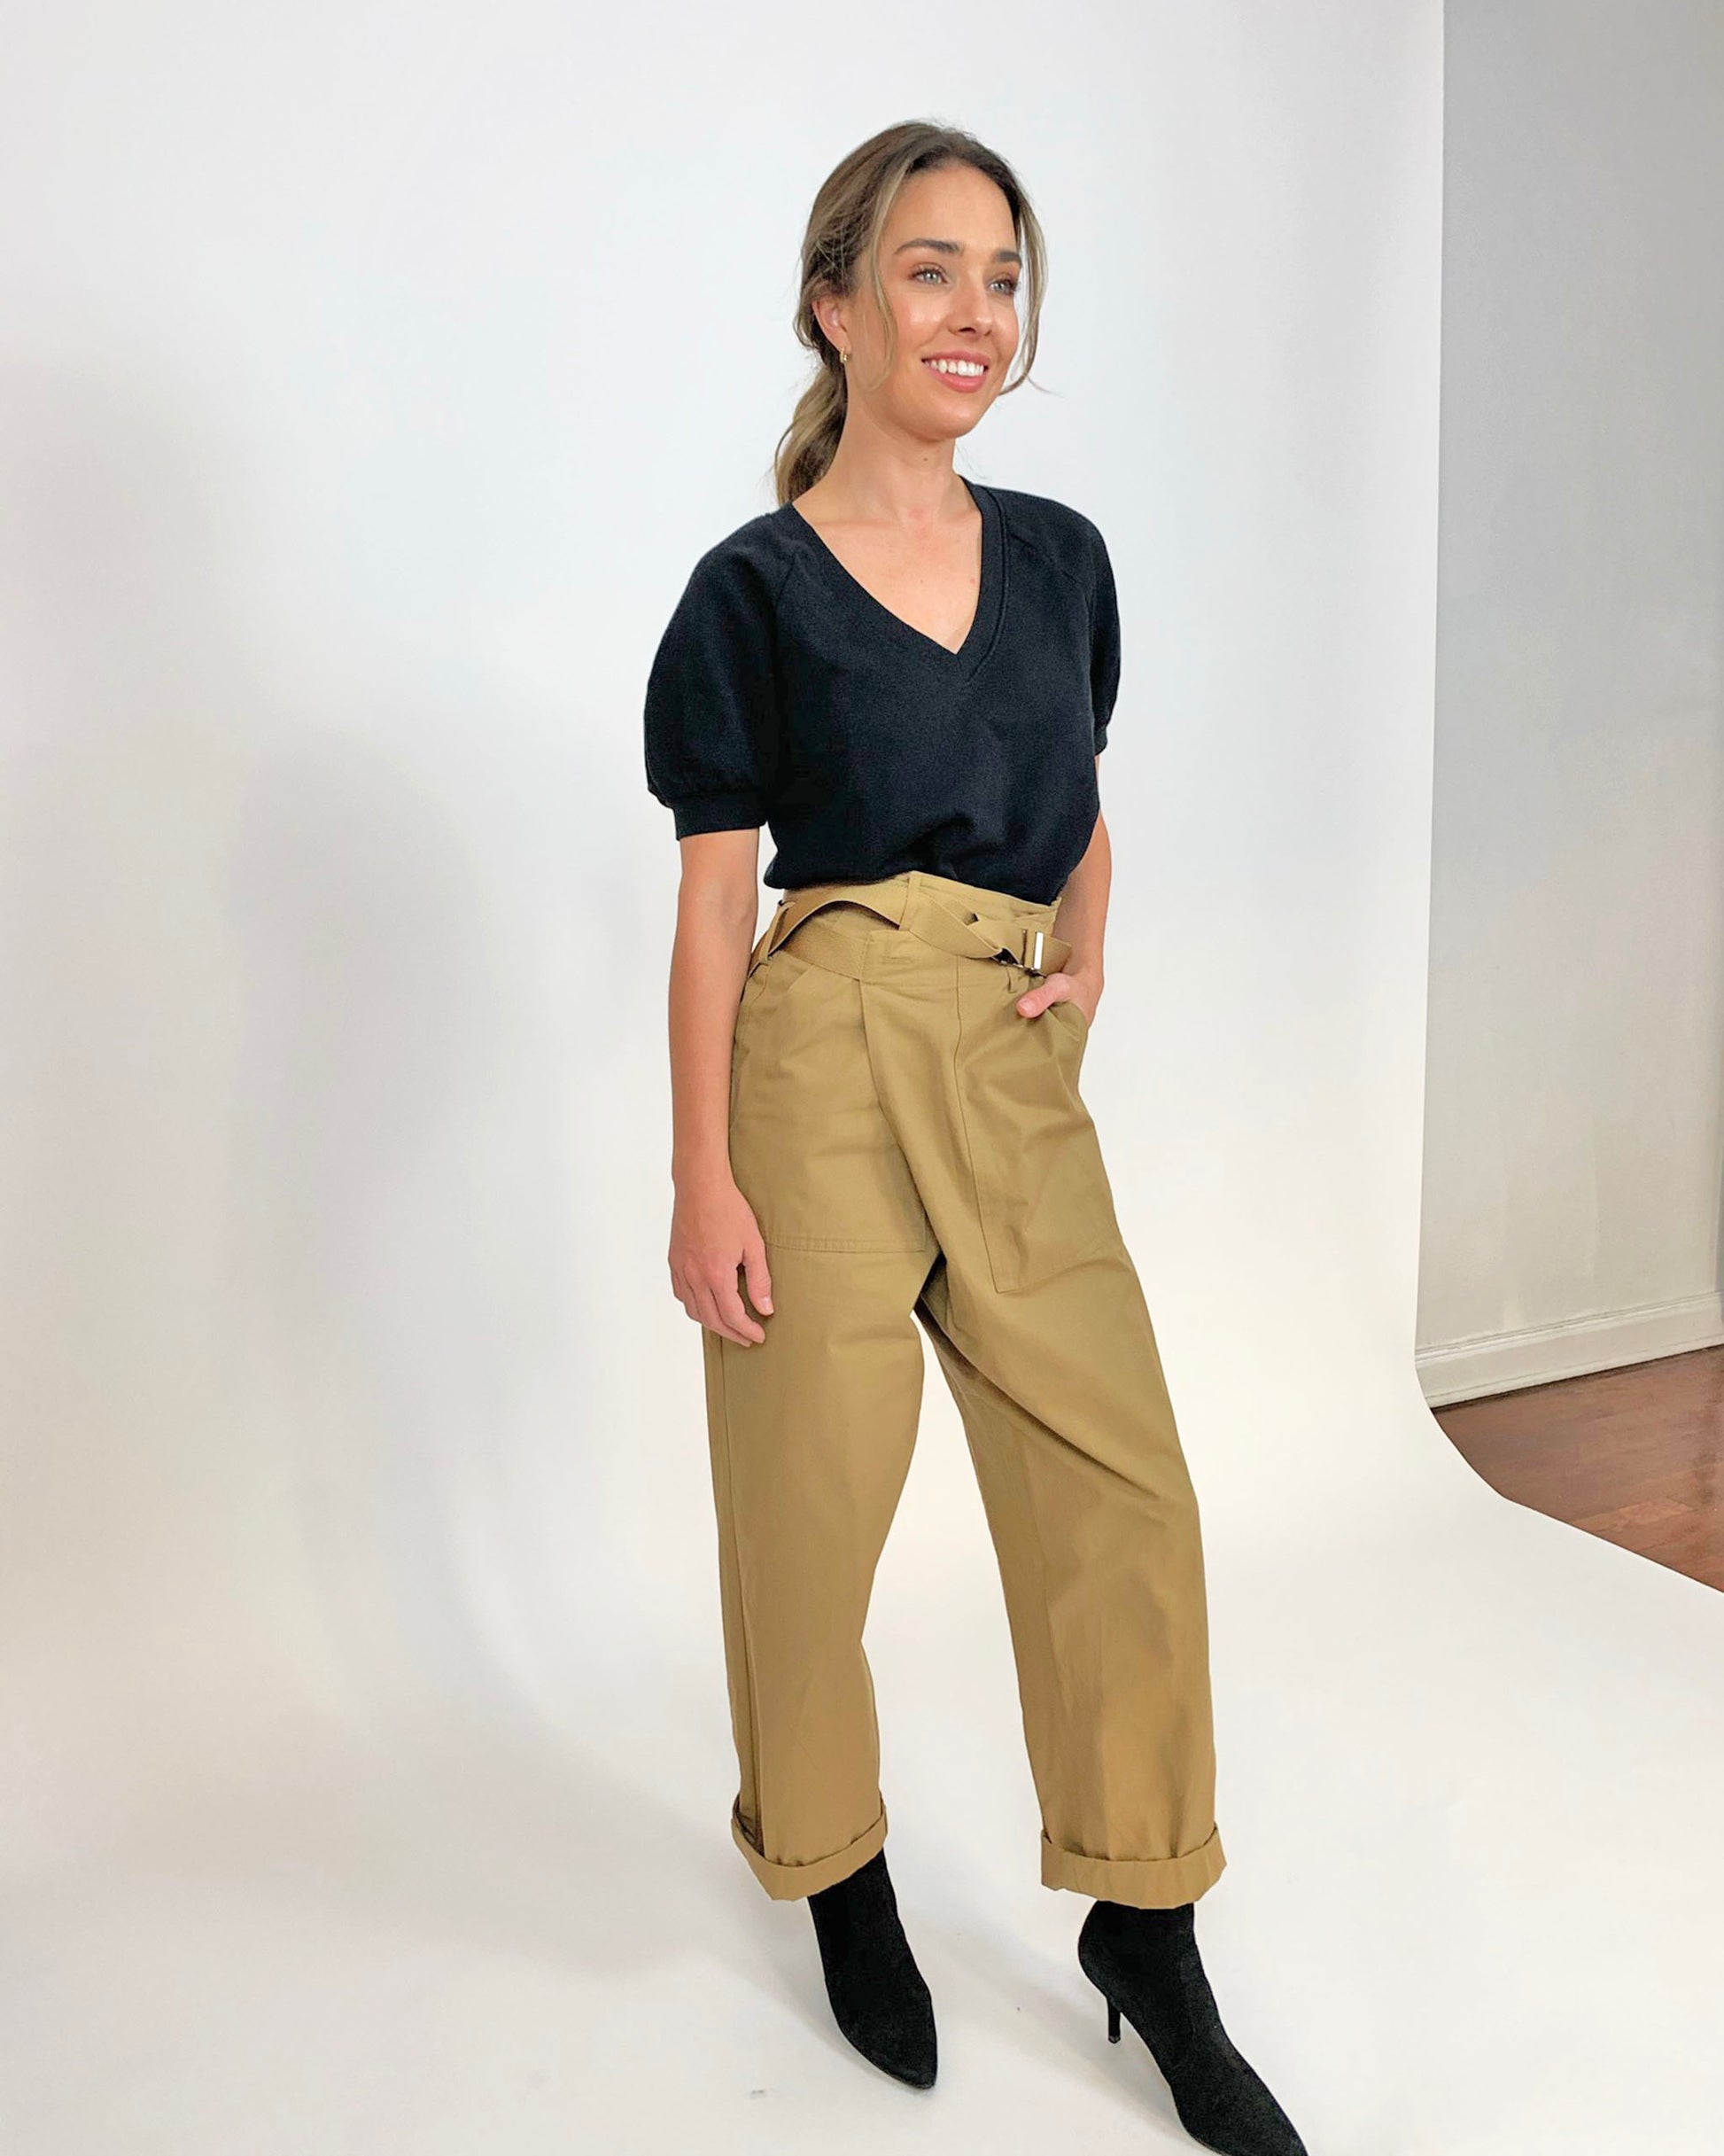 Black organic cotton v-neck sweatshirt on model in tan cargo pants and black heels with hand in pocket